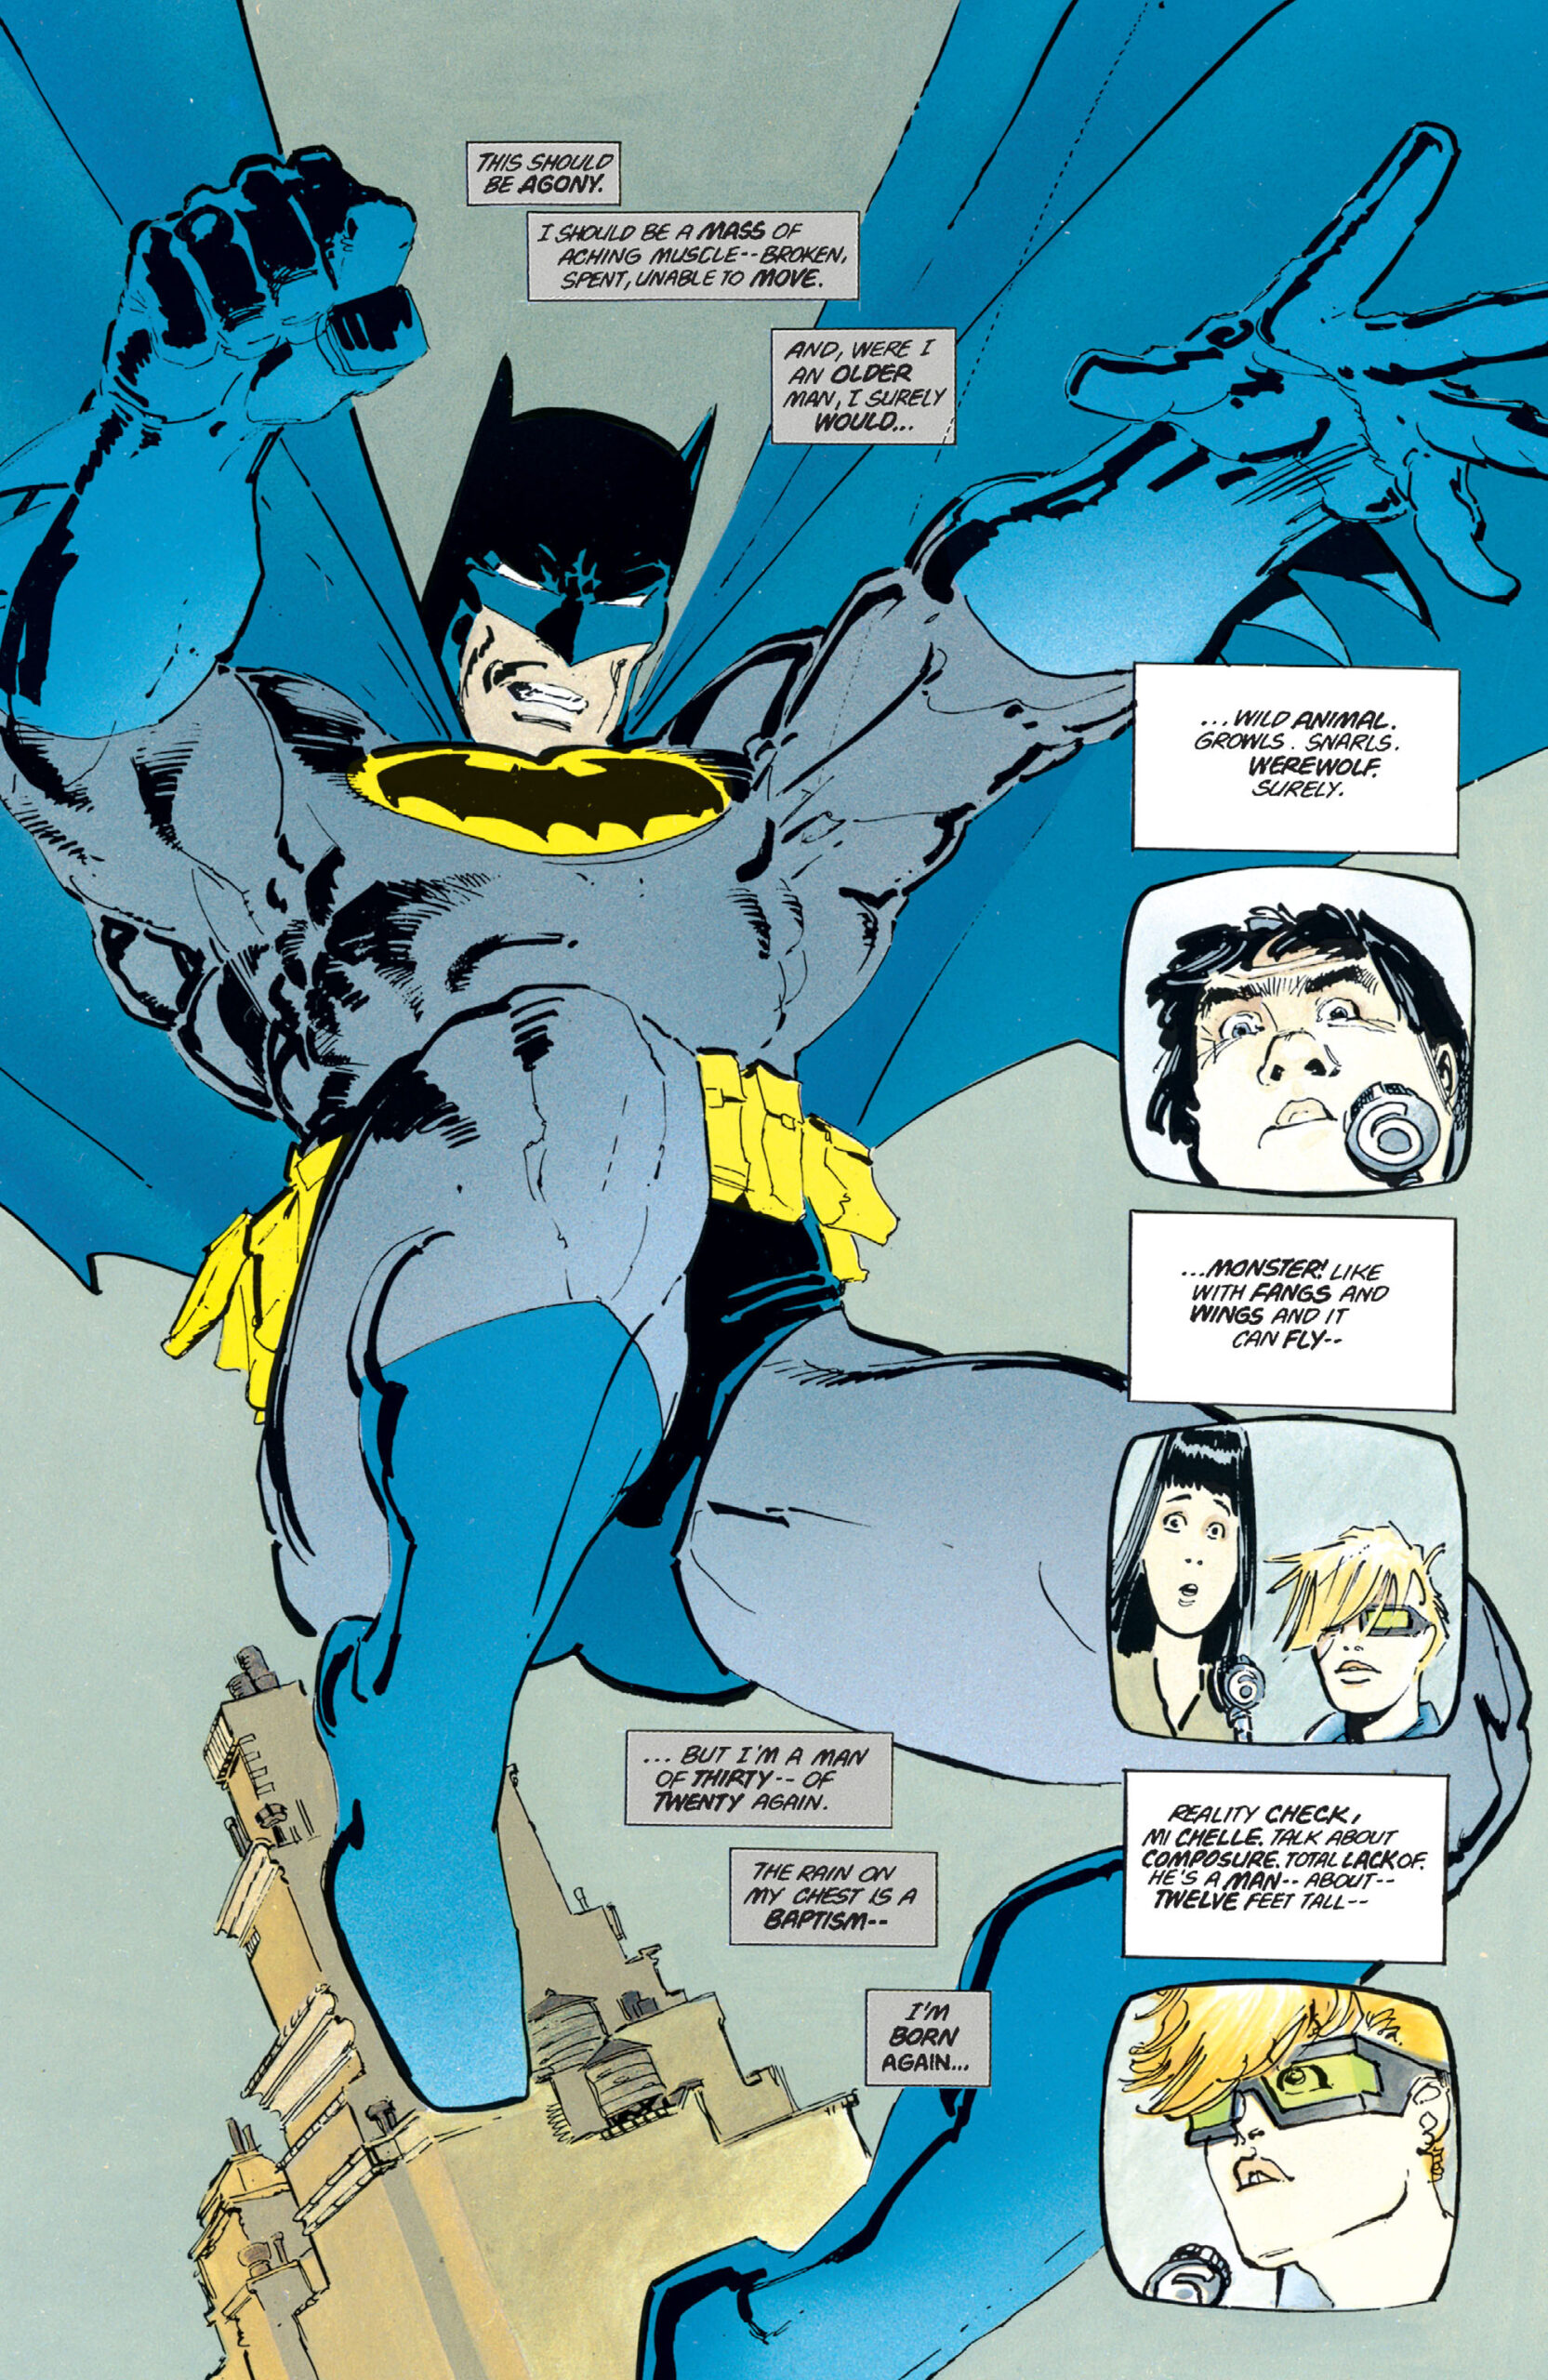 Batman rides once more in Batman: The Dark Knight Returns Vol. 1 #1 "The Dark Knight Returns" (1986), DC Comics. Words and art by Frank Miller.